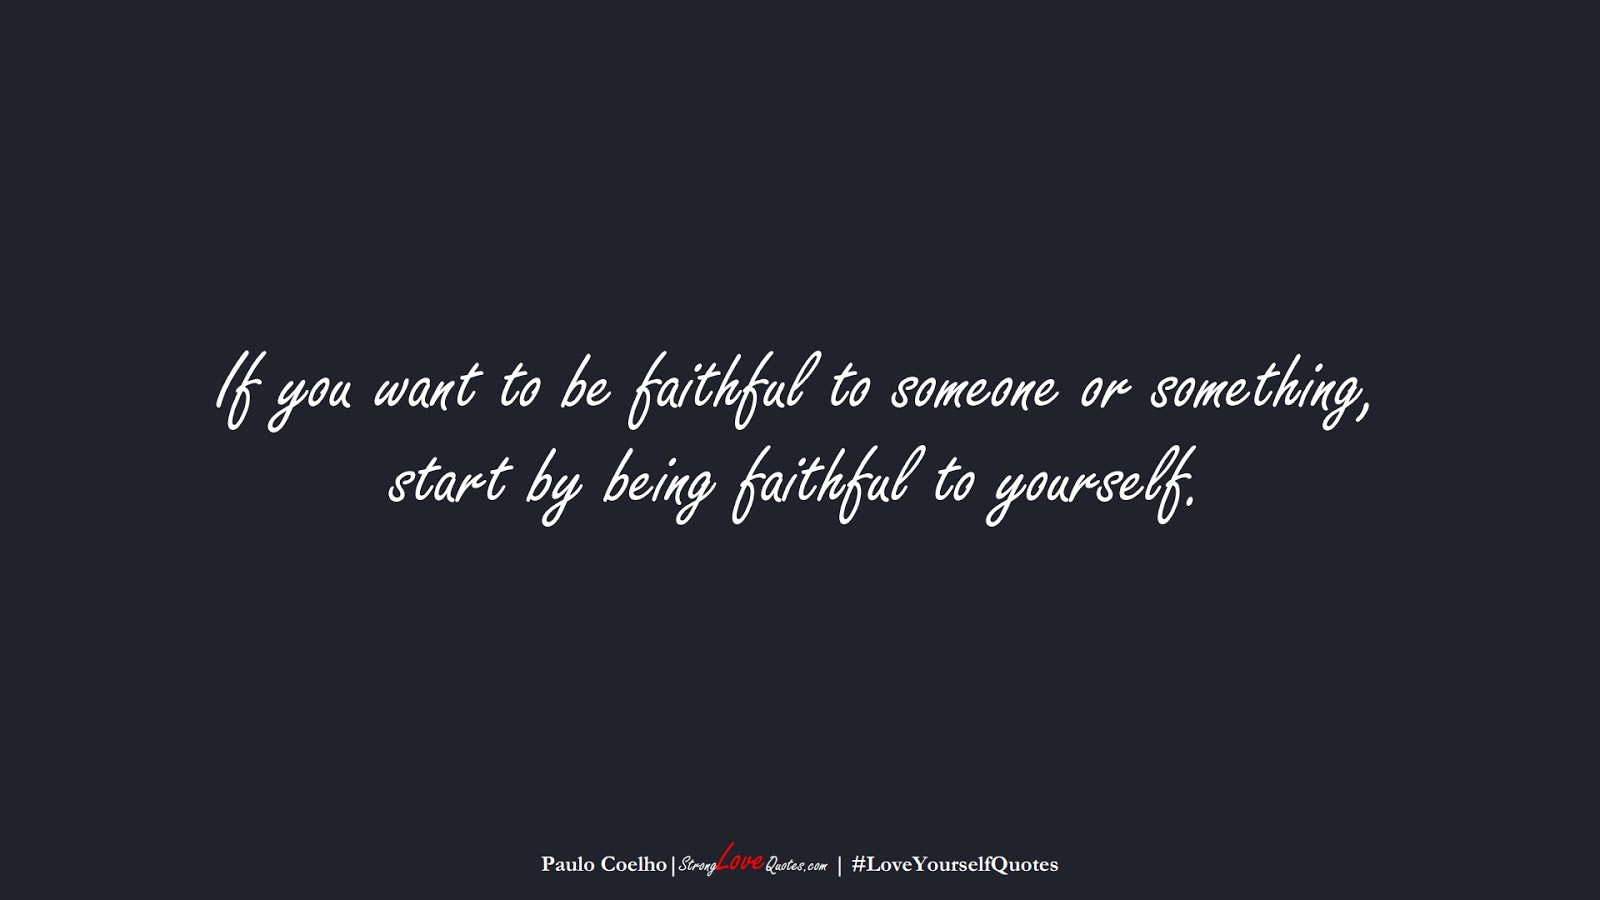 If you want to be faithful to someone or something, start by being faithful to yourself. (Paulo Coelho);  #LoveYourselfQuotes